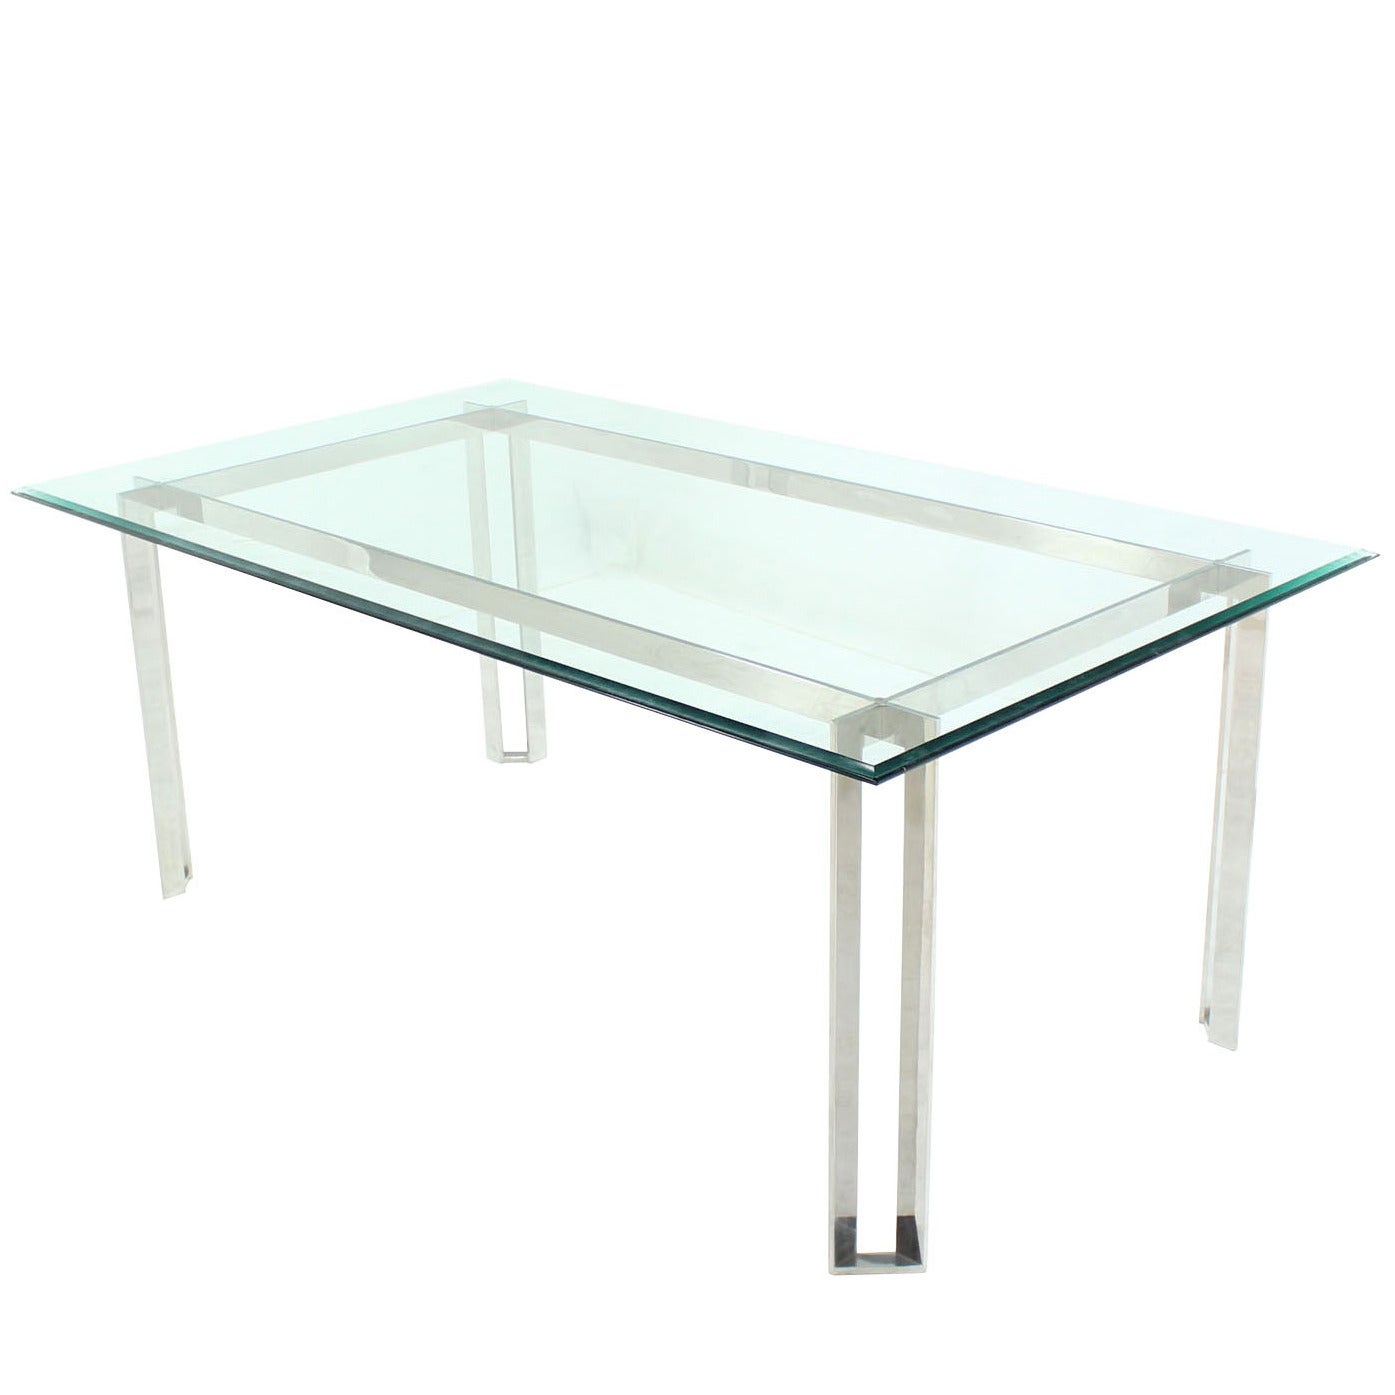 Polished Stainless Steel and Thick Glass-Top Dining Room Table